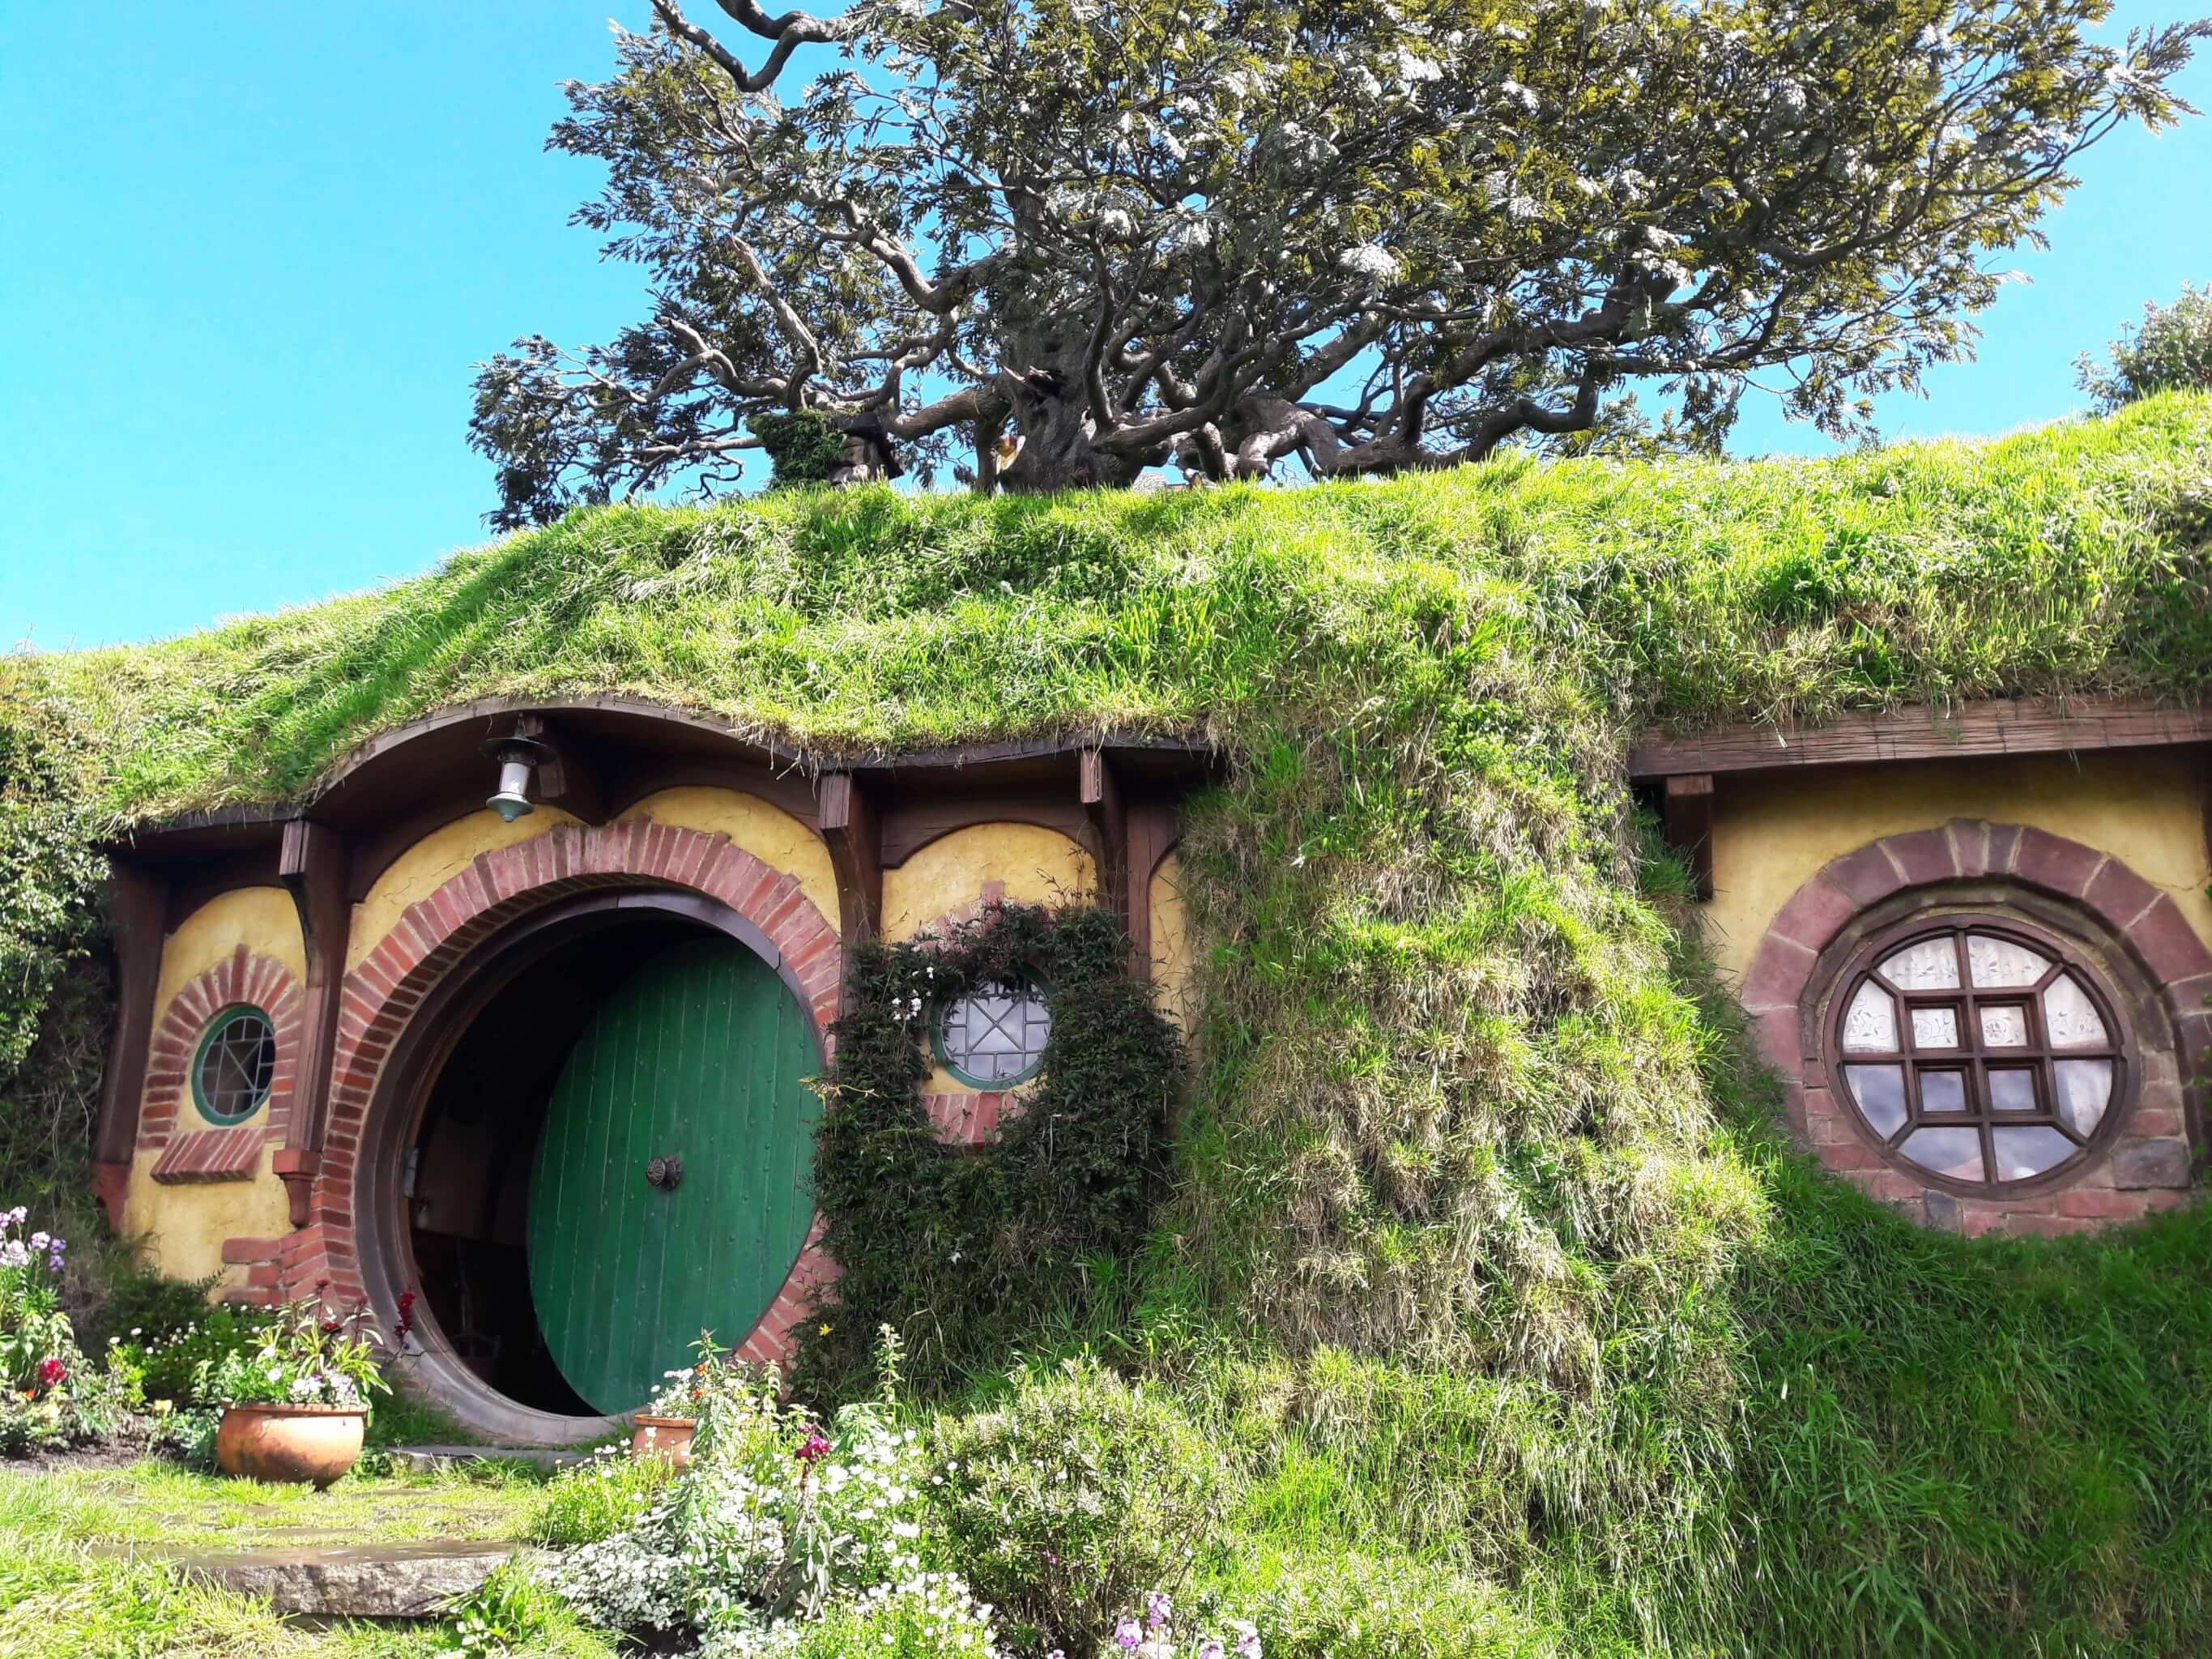 View of the cute little Hobbit Hole